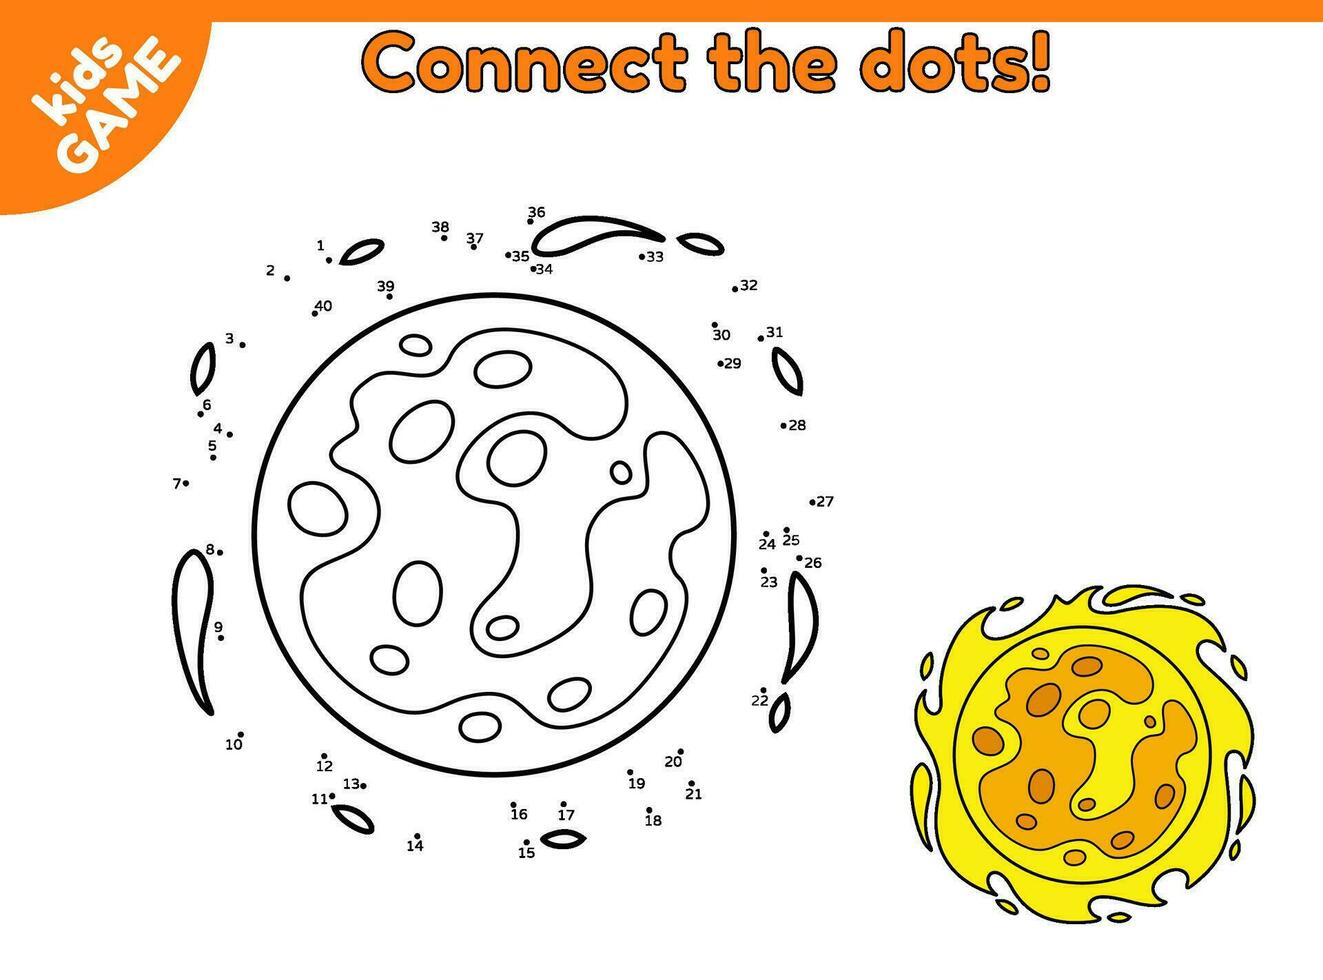 Dot to dot game for children. Connect the dots and draw a cartoon star sun in space. Activity book for kids. Educational puzzle for preschool and school. Vector drawing of celestial body in cosmos.